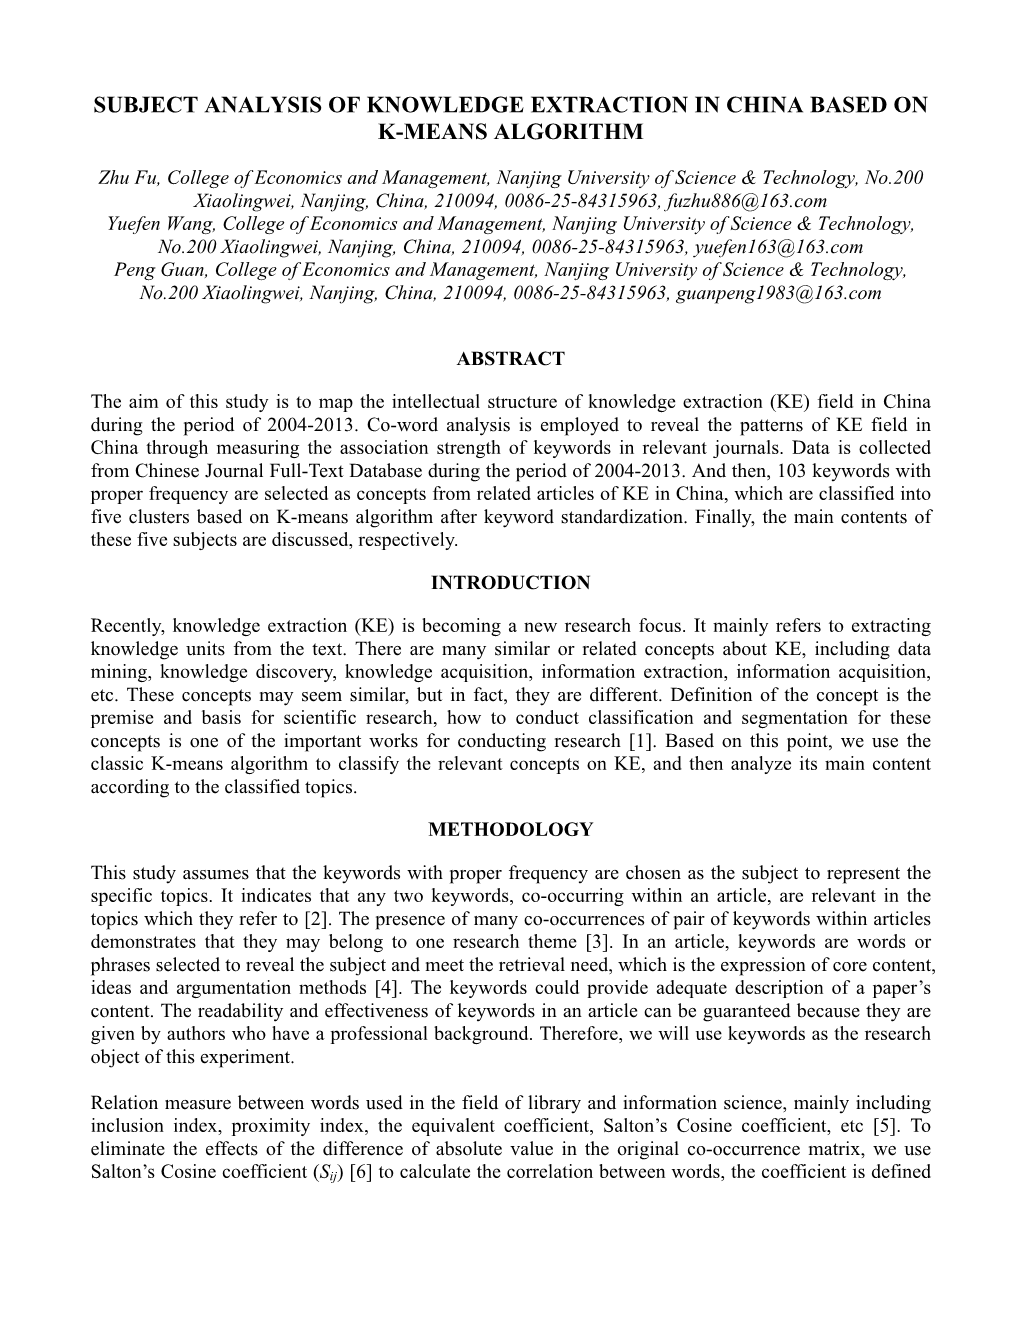 Subject Analysis of Knowledge Extraction in China Based on K-Means Algorithm